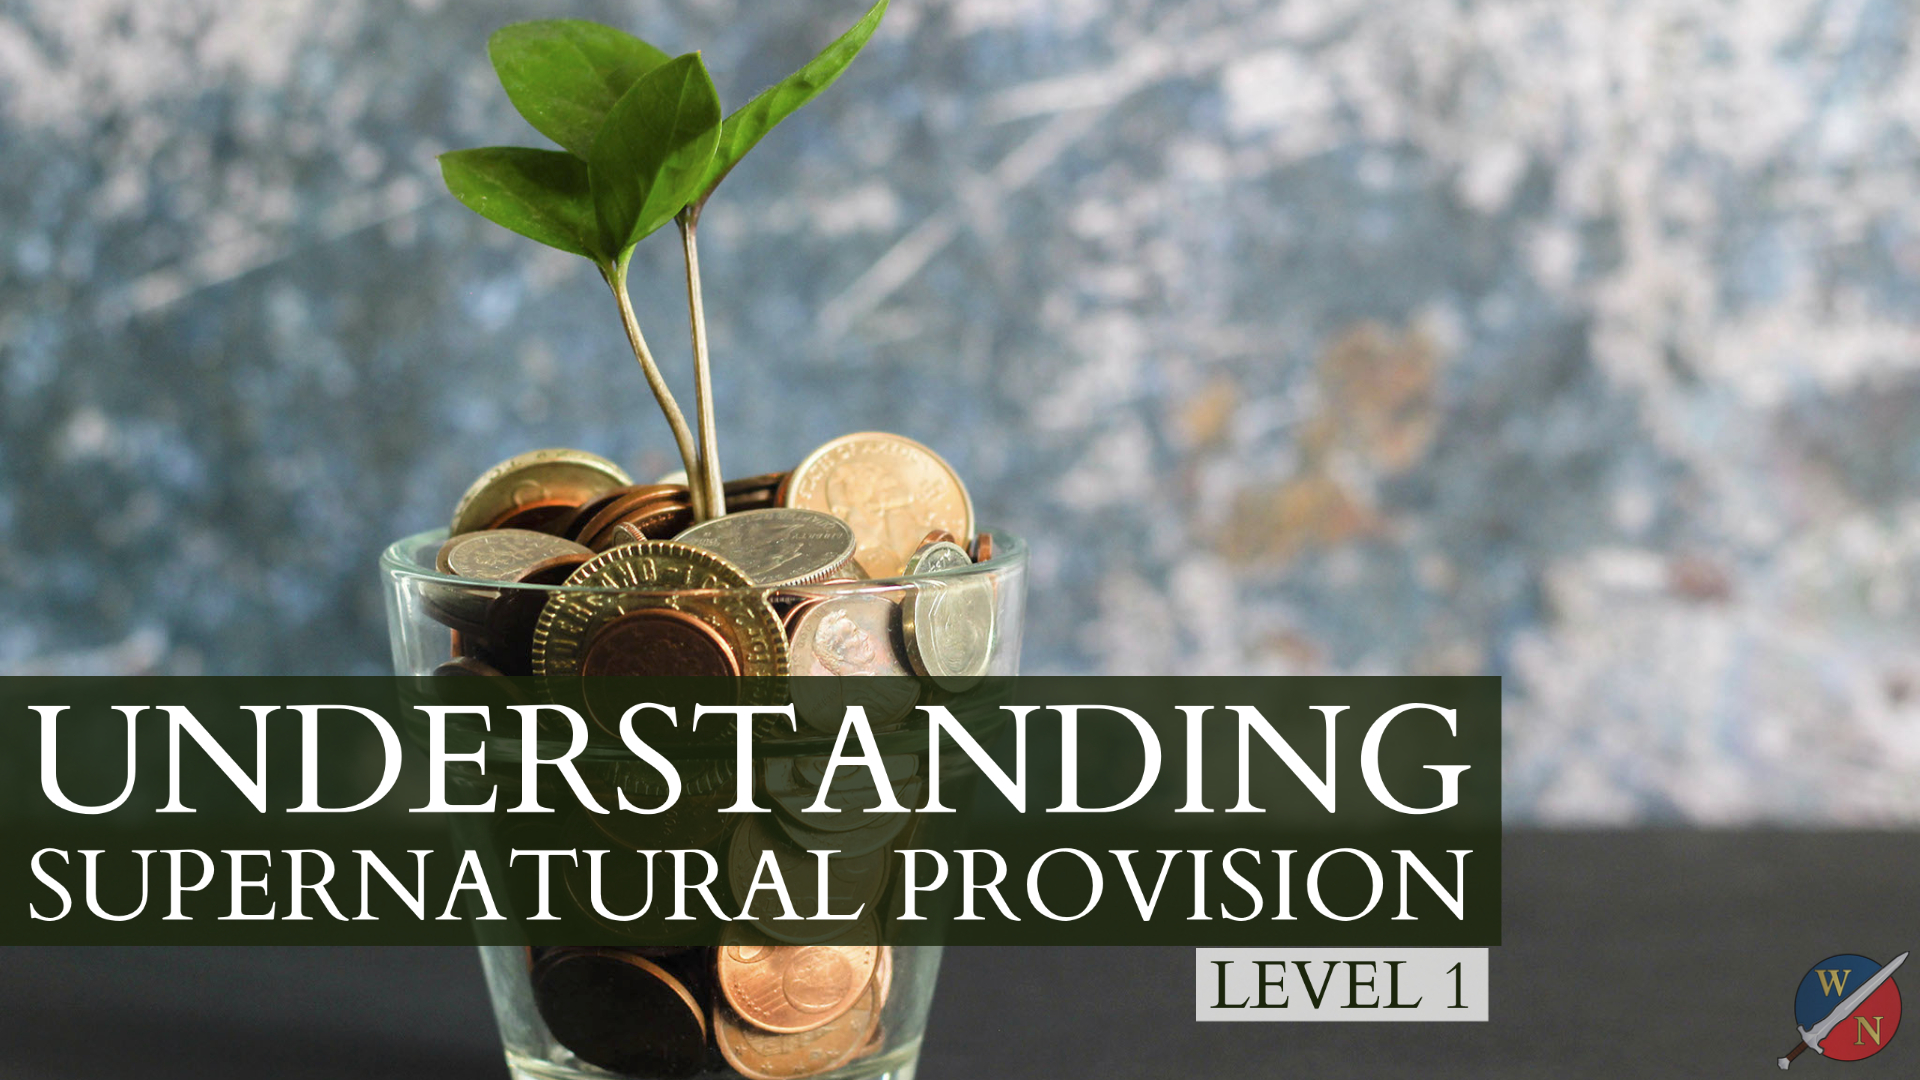 Understanding Supernatural Provision Level 1 with Dr. Kevin Zadai